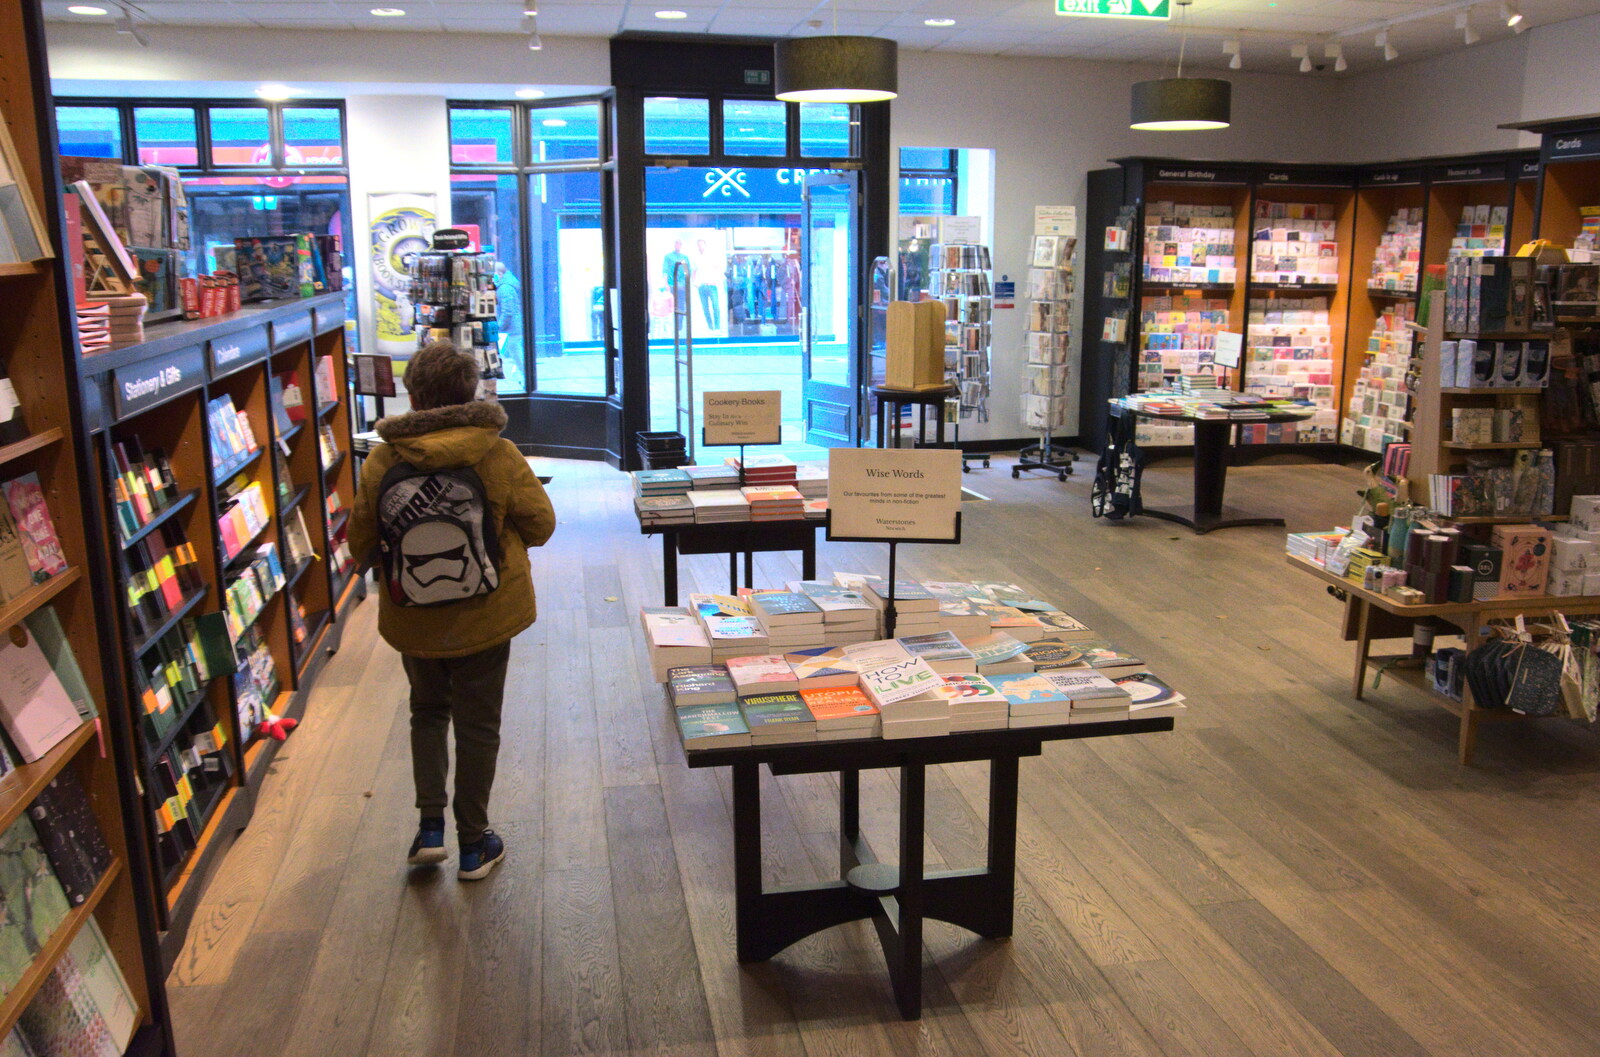 Fred roams around in Waterstone's from A Trip to Norwich, Norfolk - 27th September 2020